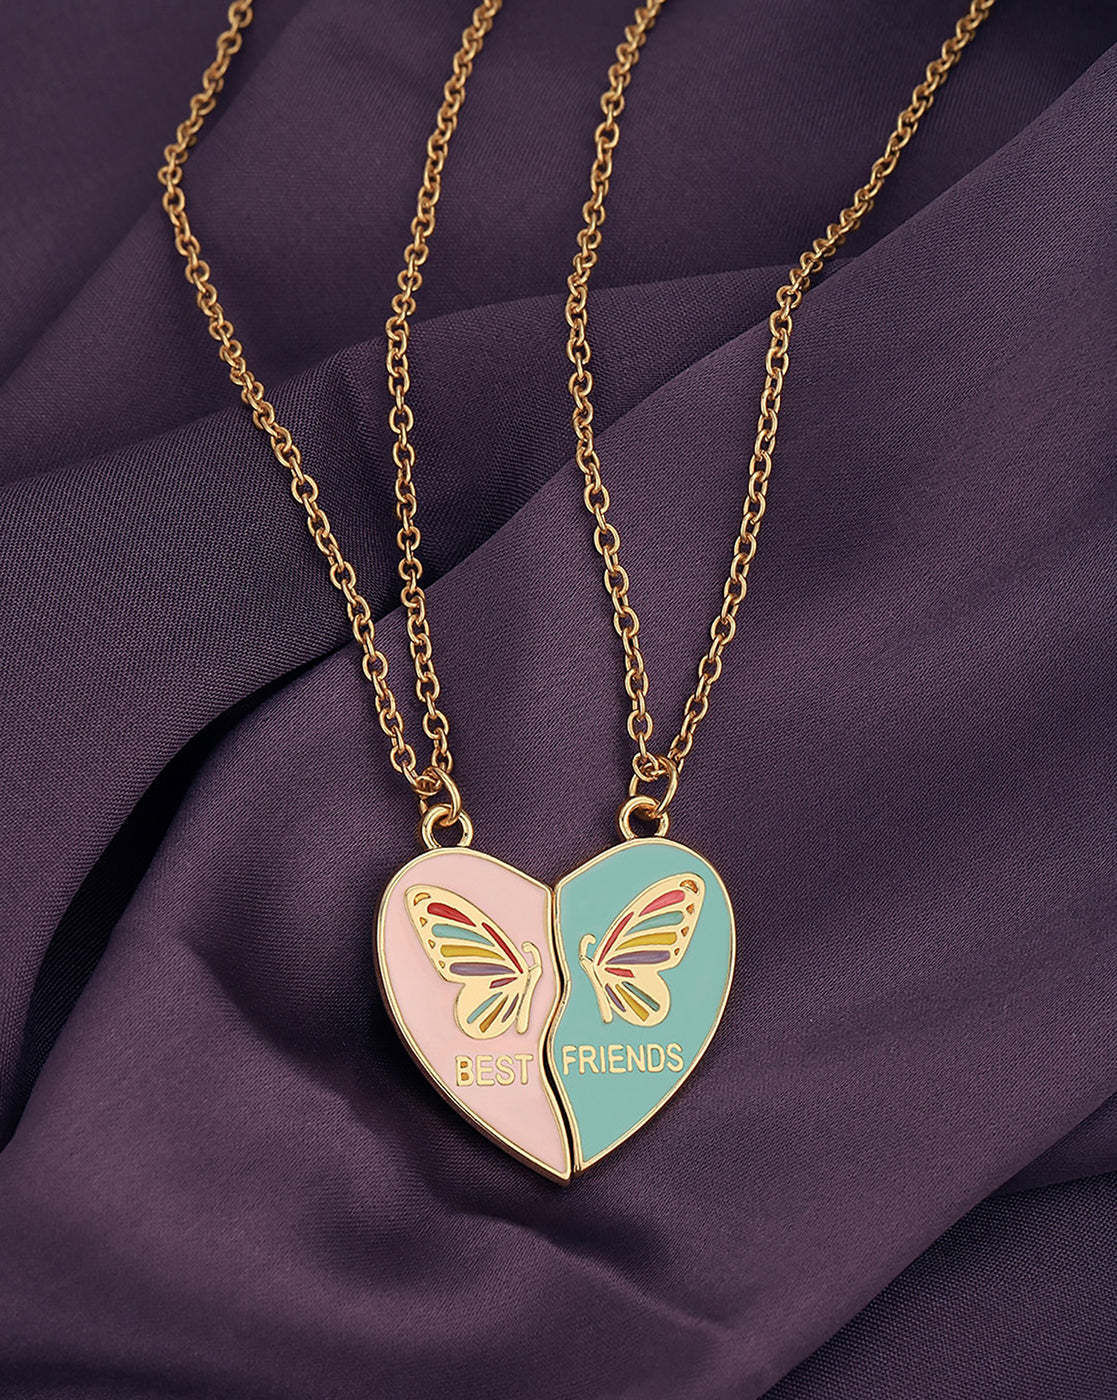 Set of 2 Gold &amp; Rose Gold Plated Enamel Best Friend Heart Pendant with chain for friends